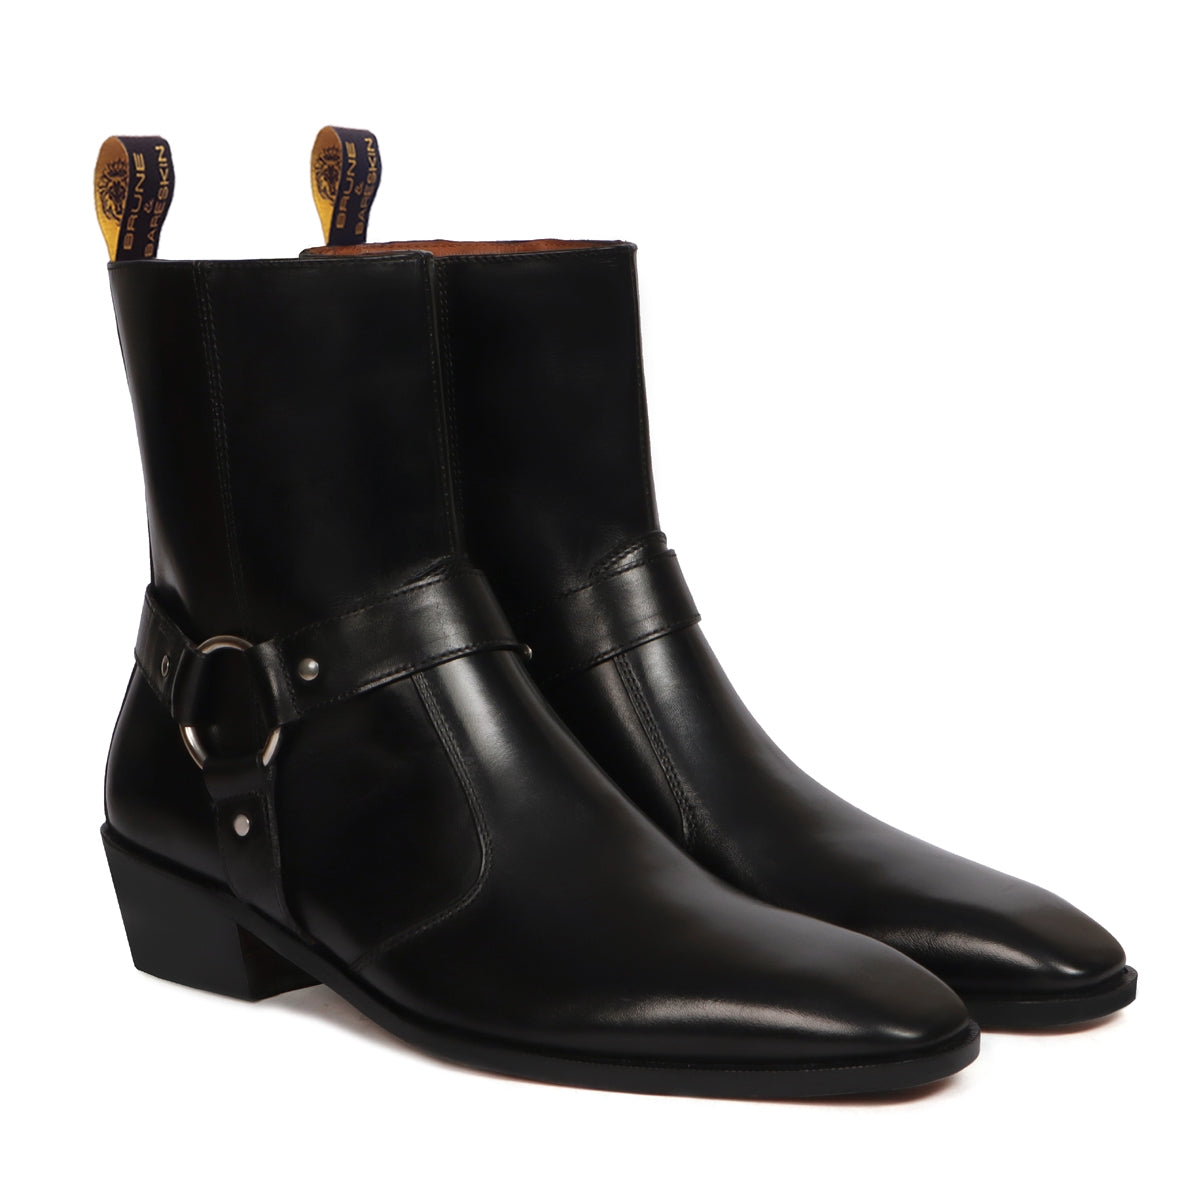 Stylish Buckle Strap Side Zipper Boot in Black Genuine Leather with Perfect Cuban Heel